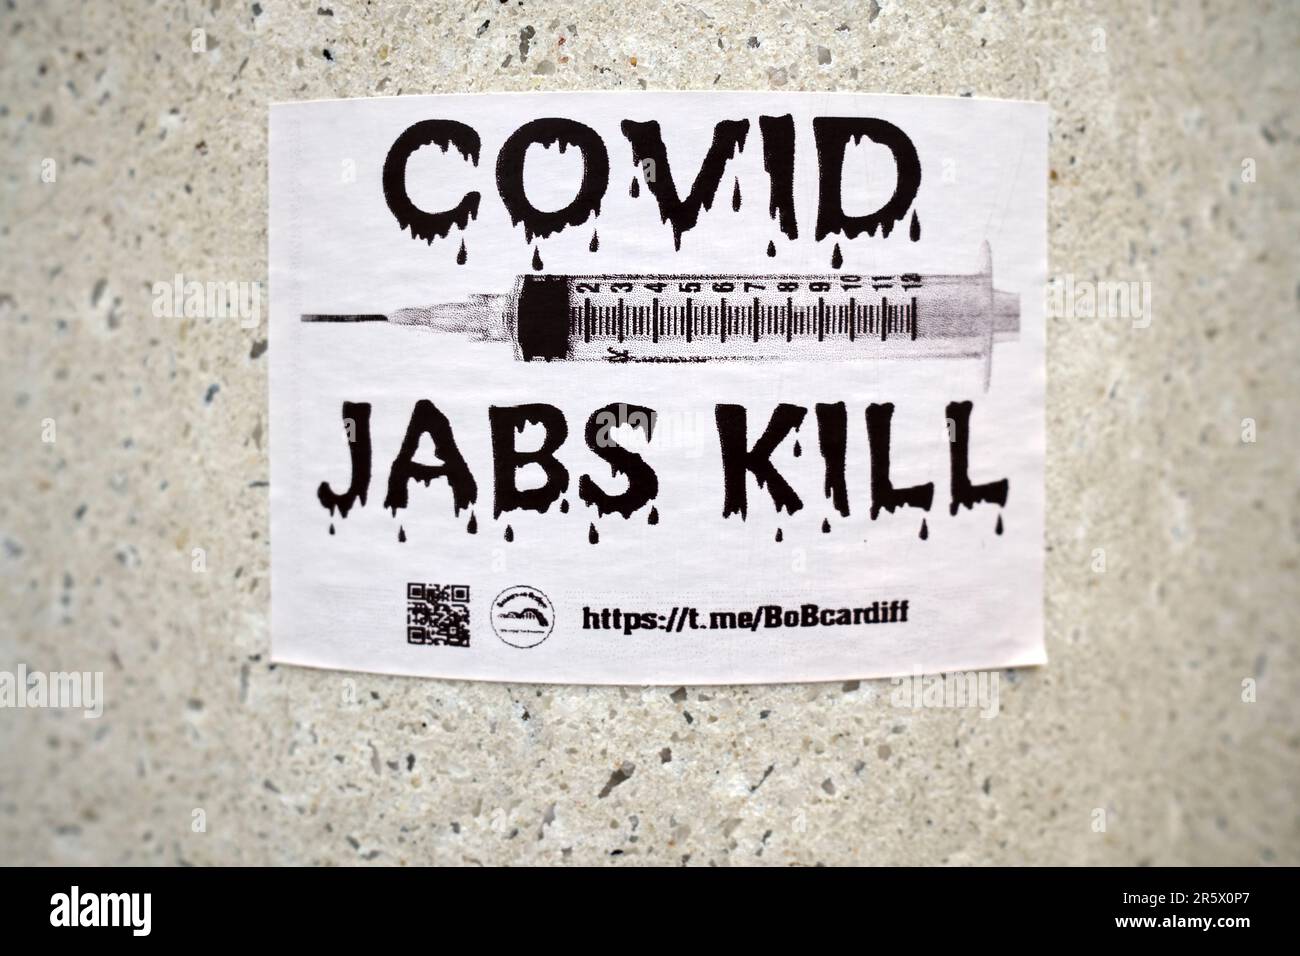 Anti Covid Poster Cardiff South Wales Stock Photo